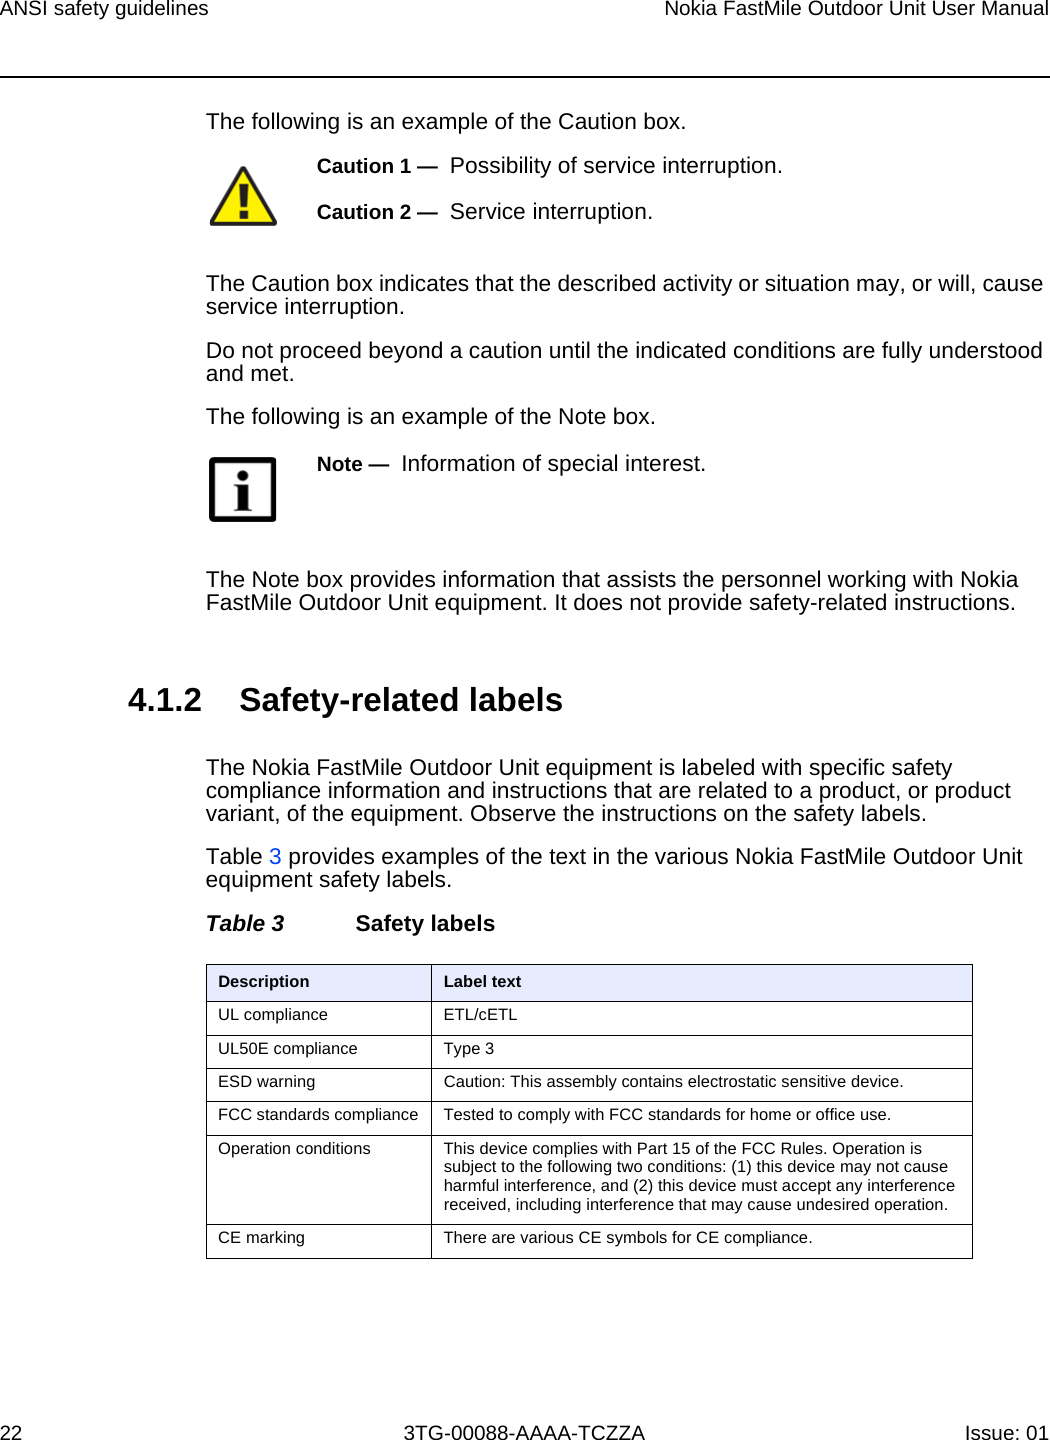 ANSI safety guidelines22Nokia FastMile Outdoor Unit User Manual3TG-00088-AAAA-TCZZA Issue: 01The following is an example of the Caution box.The Caution box indicates that the described activity or situation may, or will, cause service interruption.Do not proceed beyond a caution until the indicated conditions are fully understood and met.The following is an example of the Note box.The Note box provides information that assists the personnel working with Nokia FastMile Outdoor Unit equipment. It does not provide safety-related instructions.4.1.2 Safety-related labelsThe Nokia FastMile Outdoor Unit equipment is labeled with specific safety compliance information and instructions that are related to a product, or product variant, of the equipment. Observe the instructions on the safety labels.Table 3 provides examples of the text in the various Nokia FastMile Outdoor Unit equipment safety labels. Table 3 Safety labelsCaution 1 —  Possibility of service interruption.Caution 2 —  Service interruption.Note —  Information of special interest.Description Label textUL compliance ETL/cETL UL50E compliance Type 3ESD warning Caution: This assembly contains electrostatic sensitive device.FCC standards compliance Tested to comply with FCC standards for home or office use.Operation conditions This device complies with Part 15 of the FCC Rules. Operation is subject to the following two conditions: (1) this device may not cause harmful interference, and (2) this device must accept any interference received, including interference that may cause undesired operation.CE marking There are various CE symbols for CE compliance.